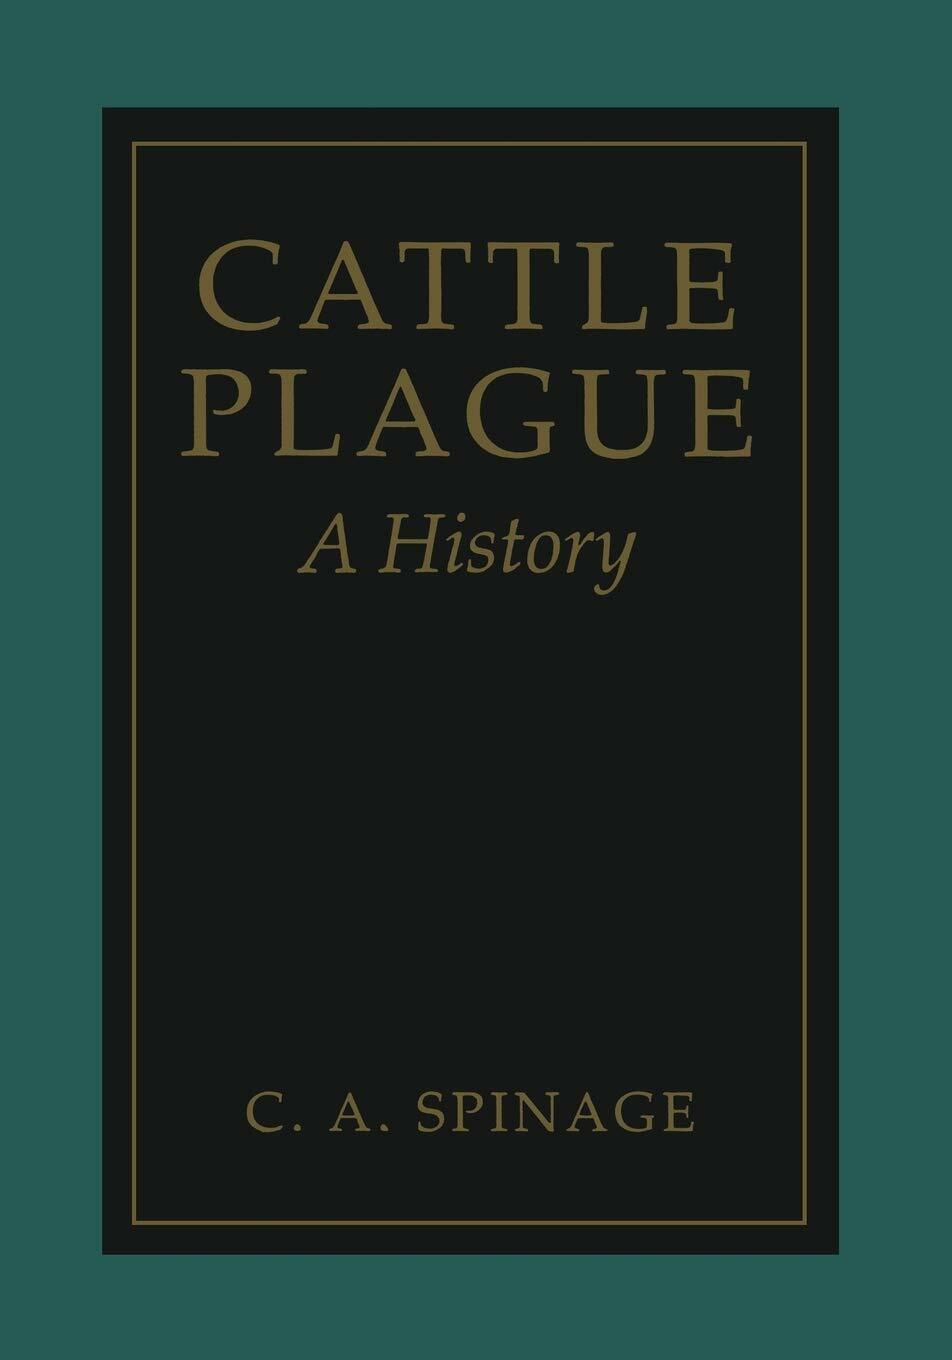 Cattle Plague - Clive Spinage - Springer, 2013 libro usato